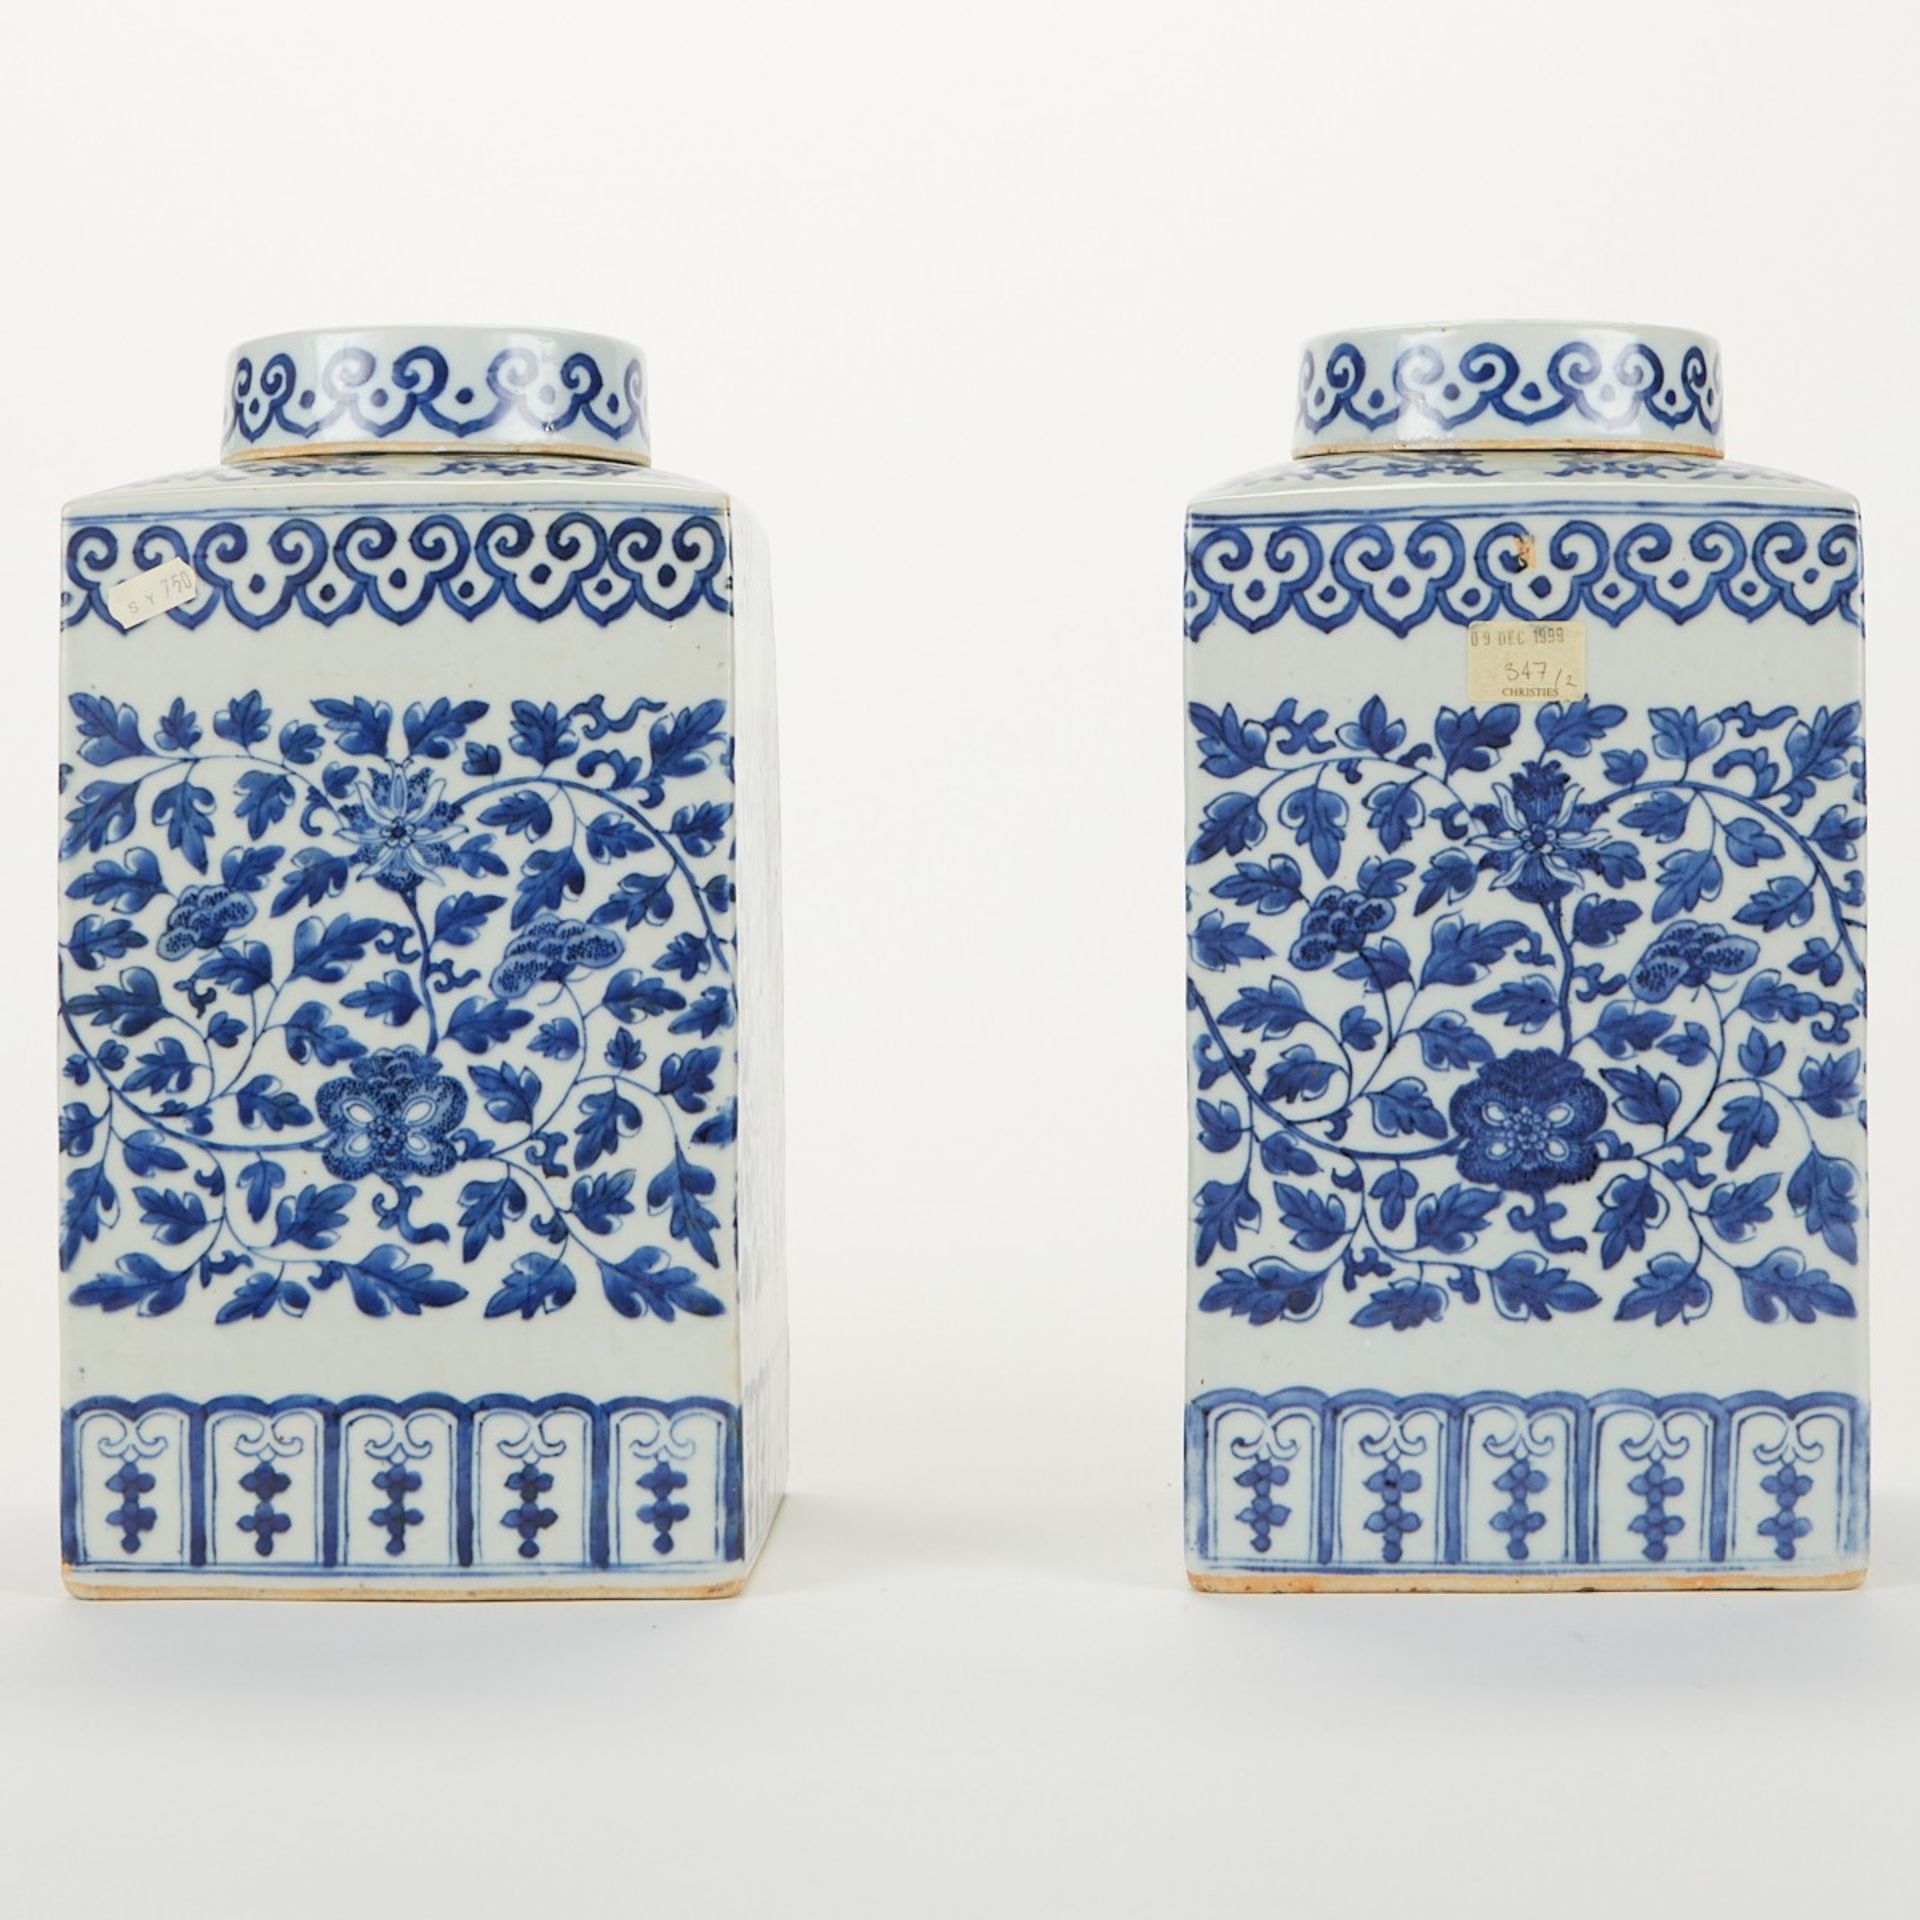 Pair of Chinese Export Blue & White Porcelain Ginger Jars - Image 4 of 9